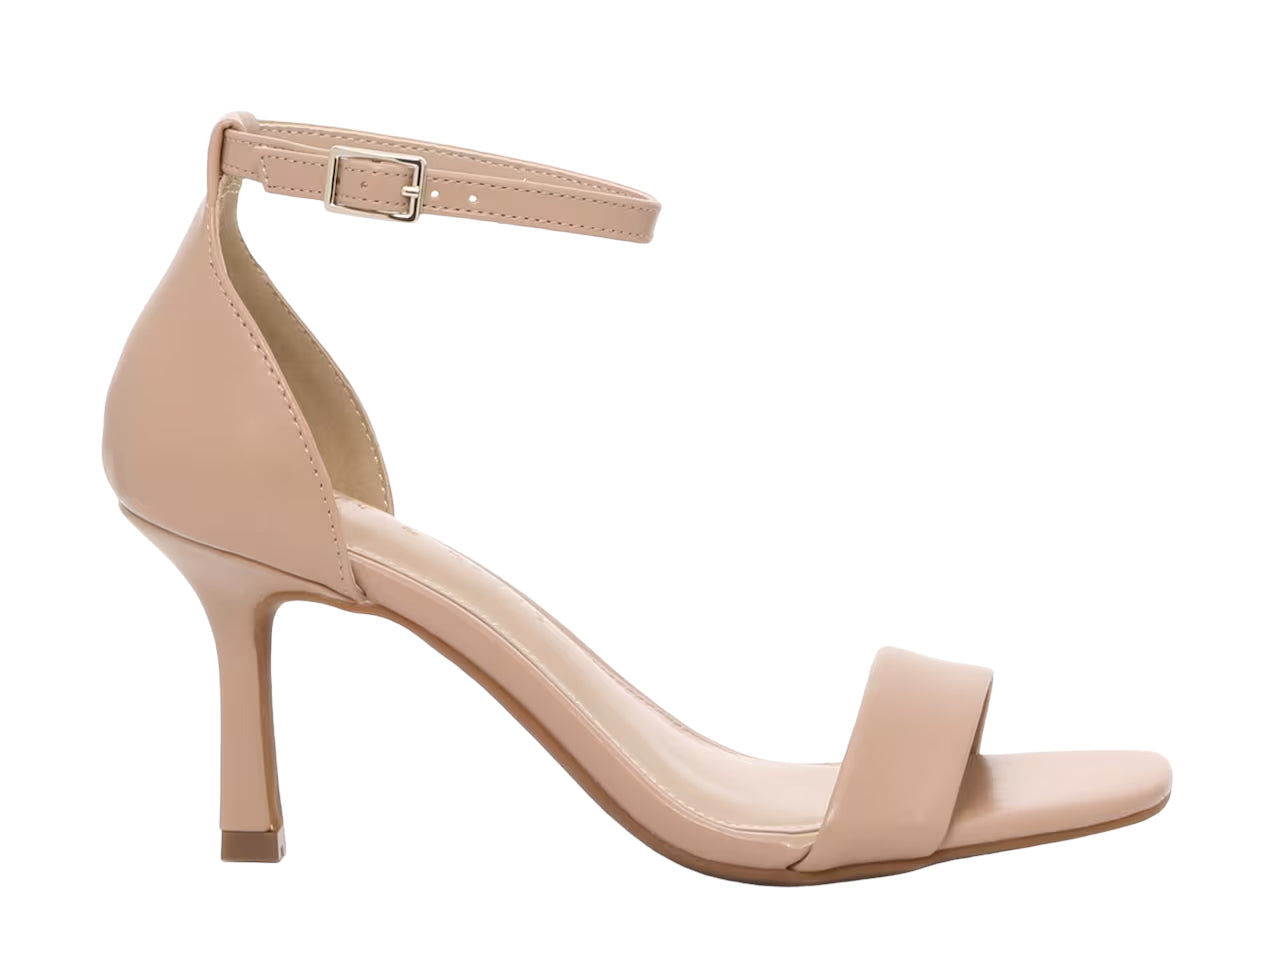 KELLY & KATIE NUDE ANKLE STRAP BARELY THERE SANDAL